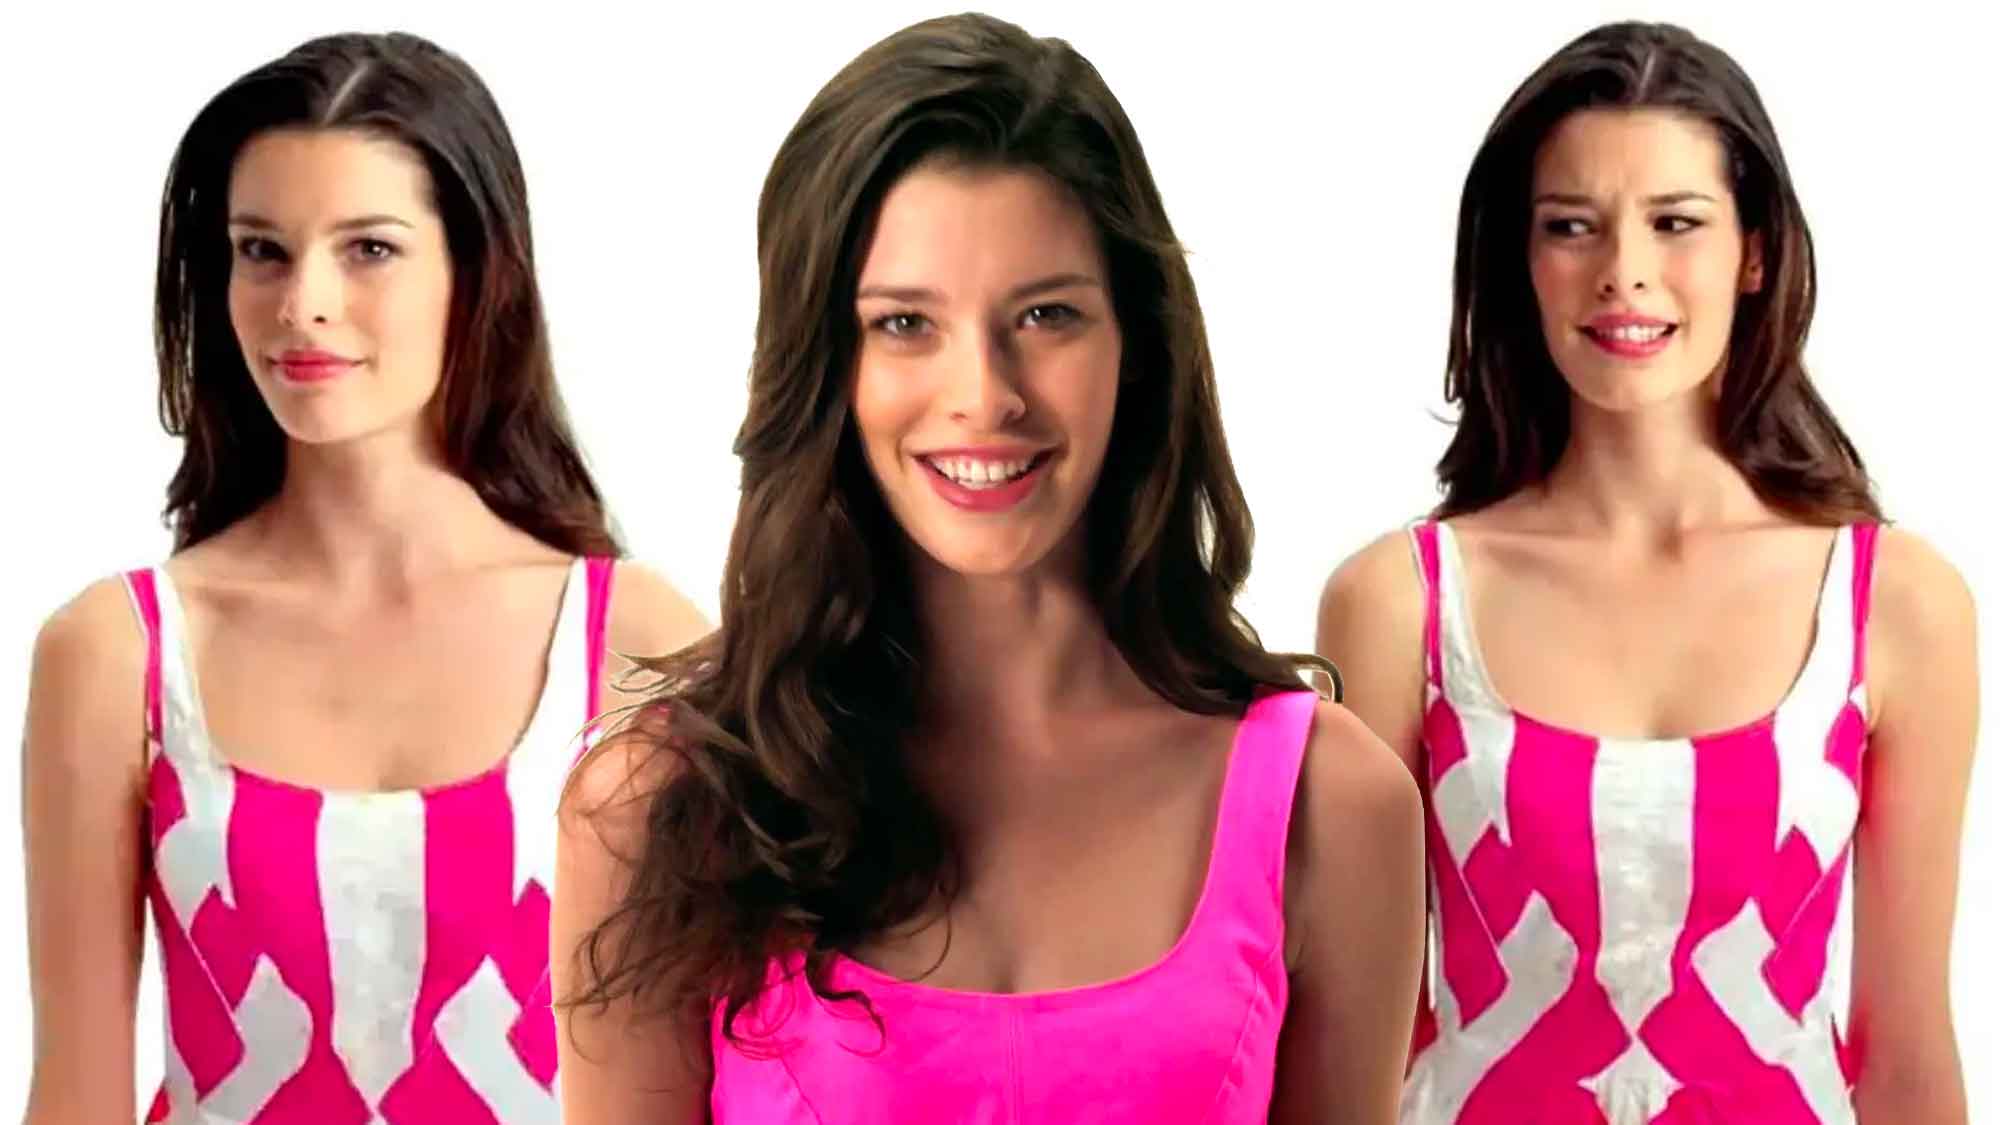 Will AT&T Make The T-Mobile Girl Take Off Her Cute Pink Dress?